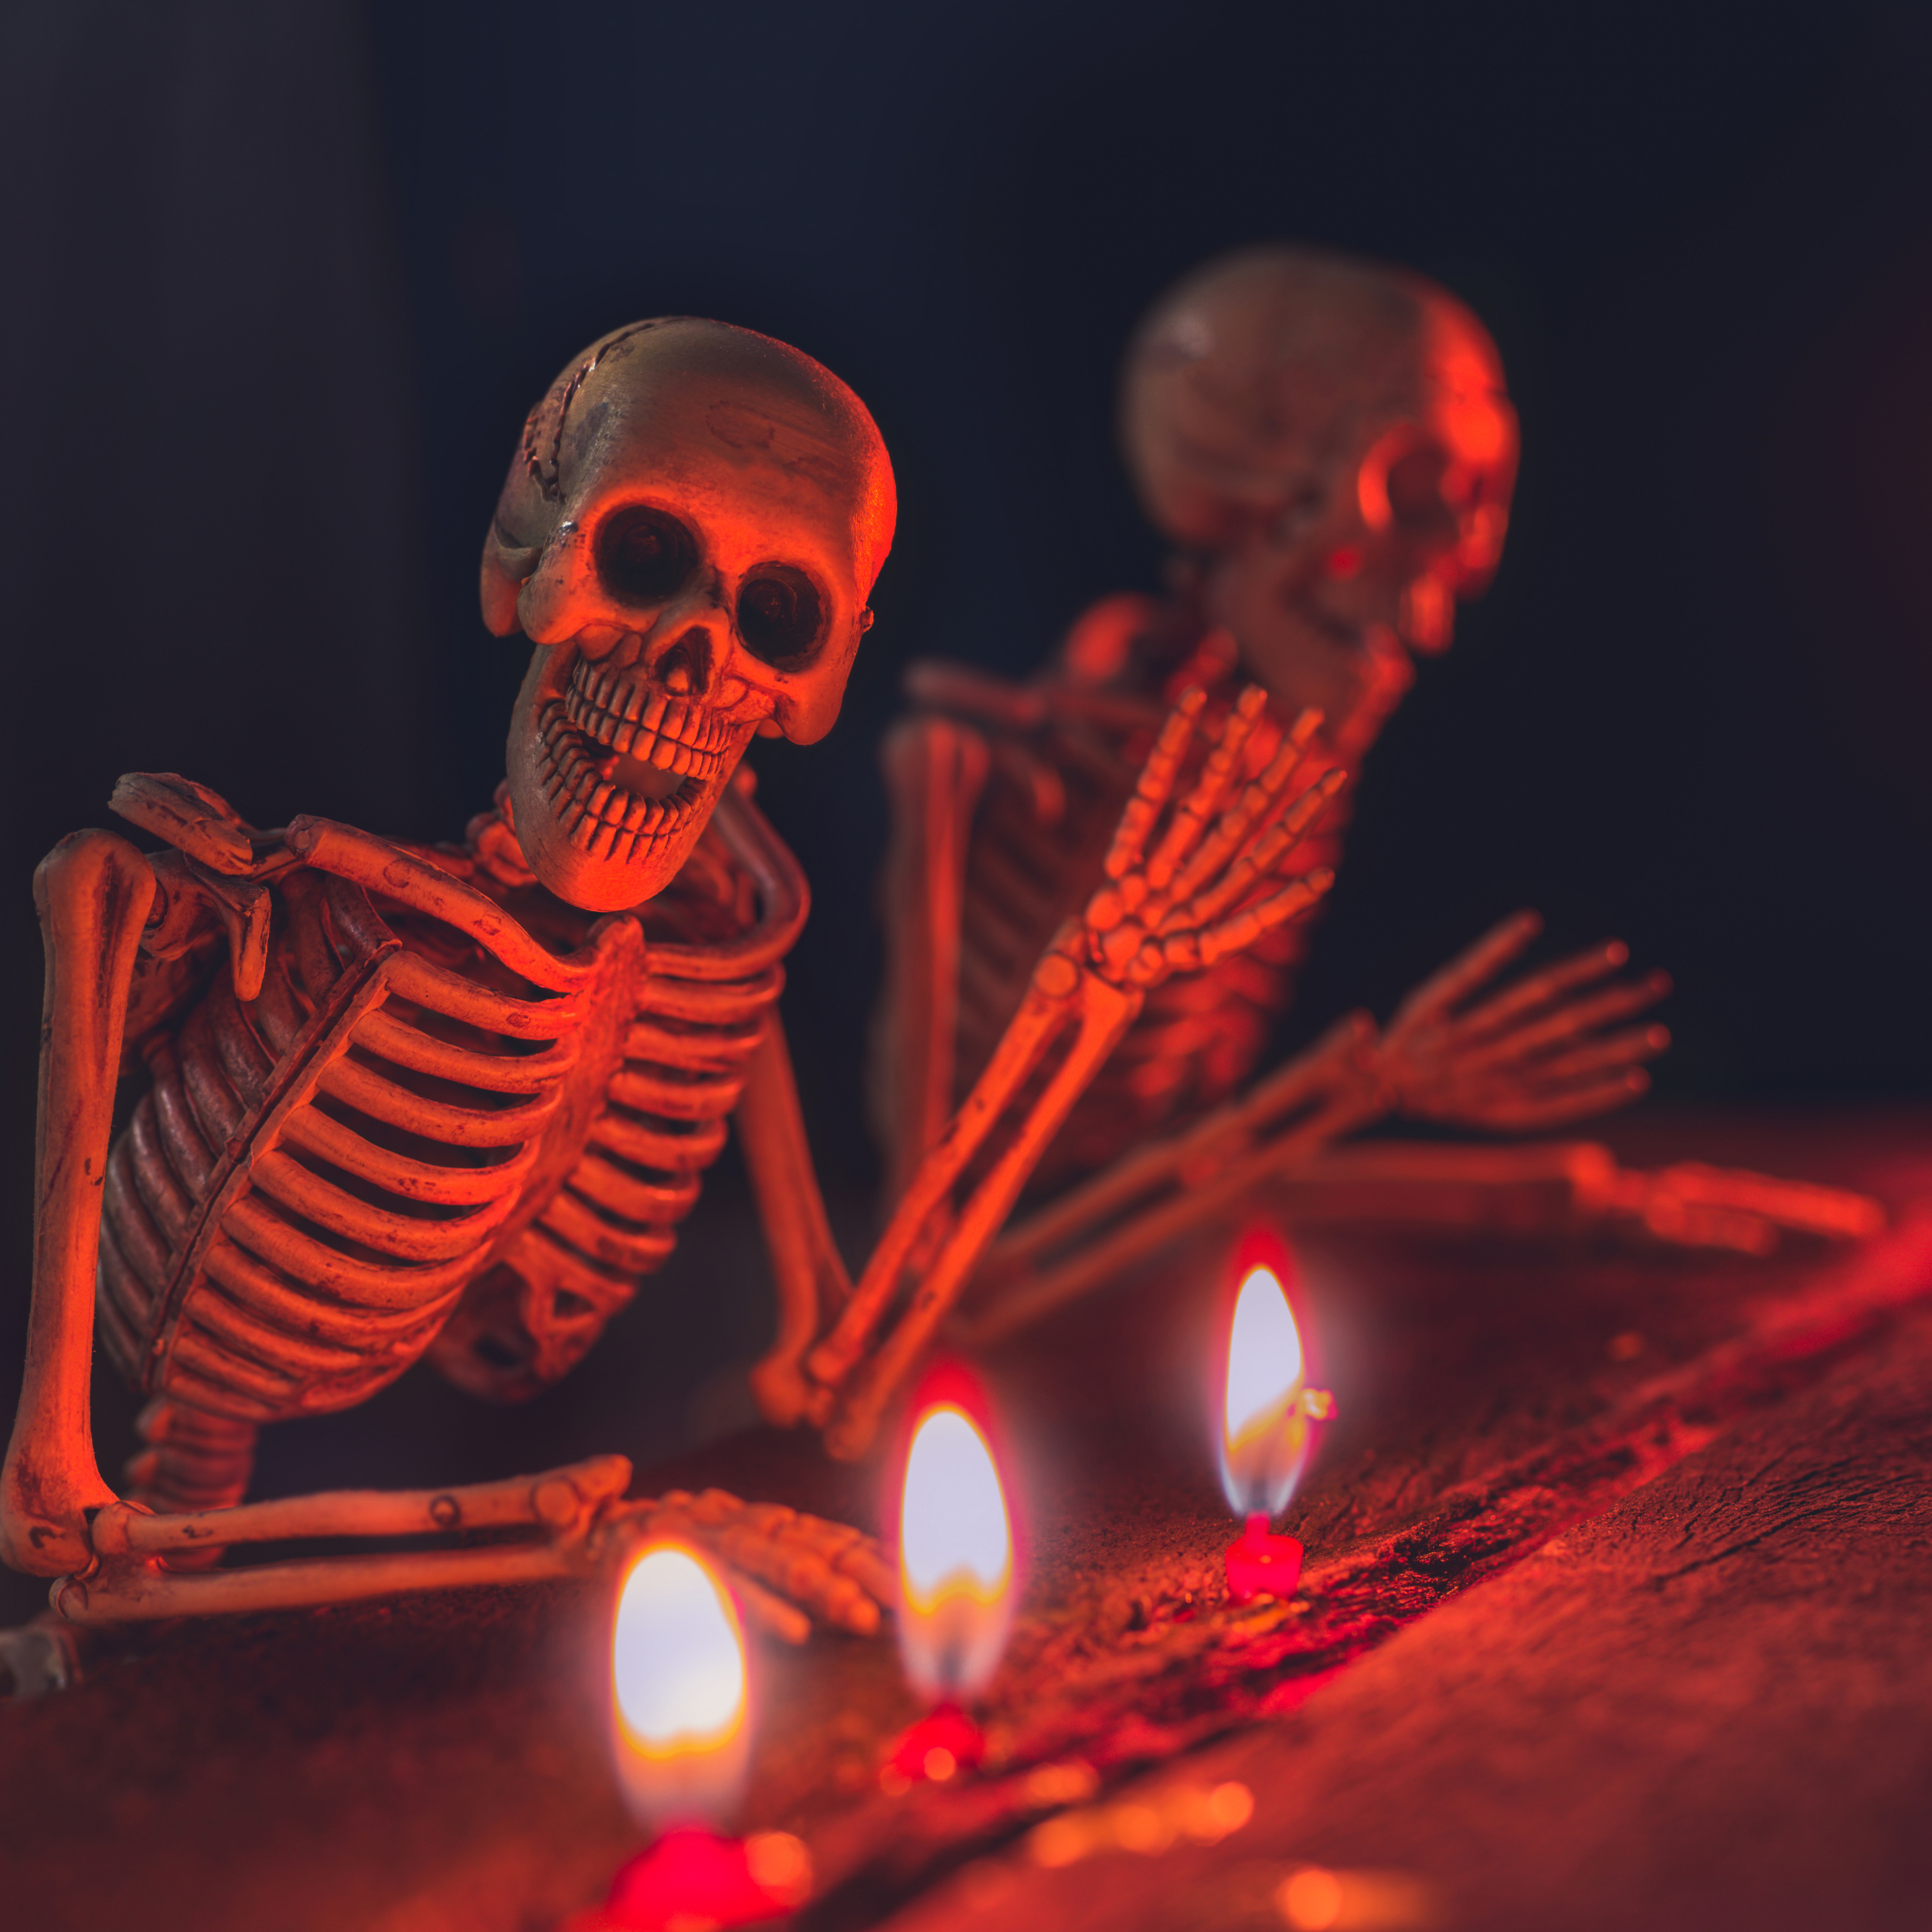 A skeleton lit by candles, smiling and waving at the viewer